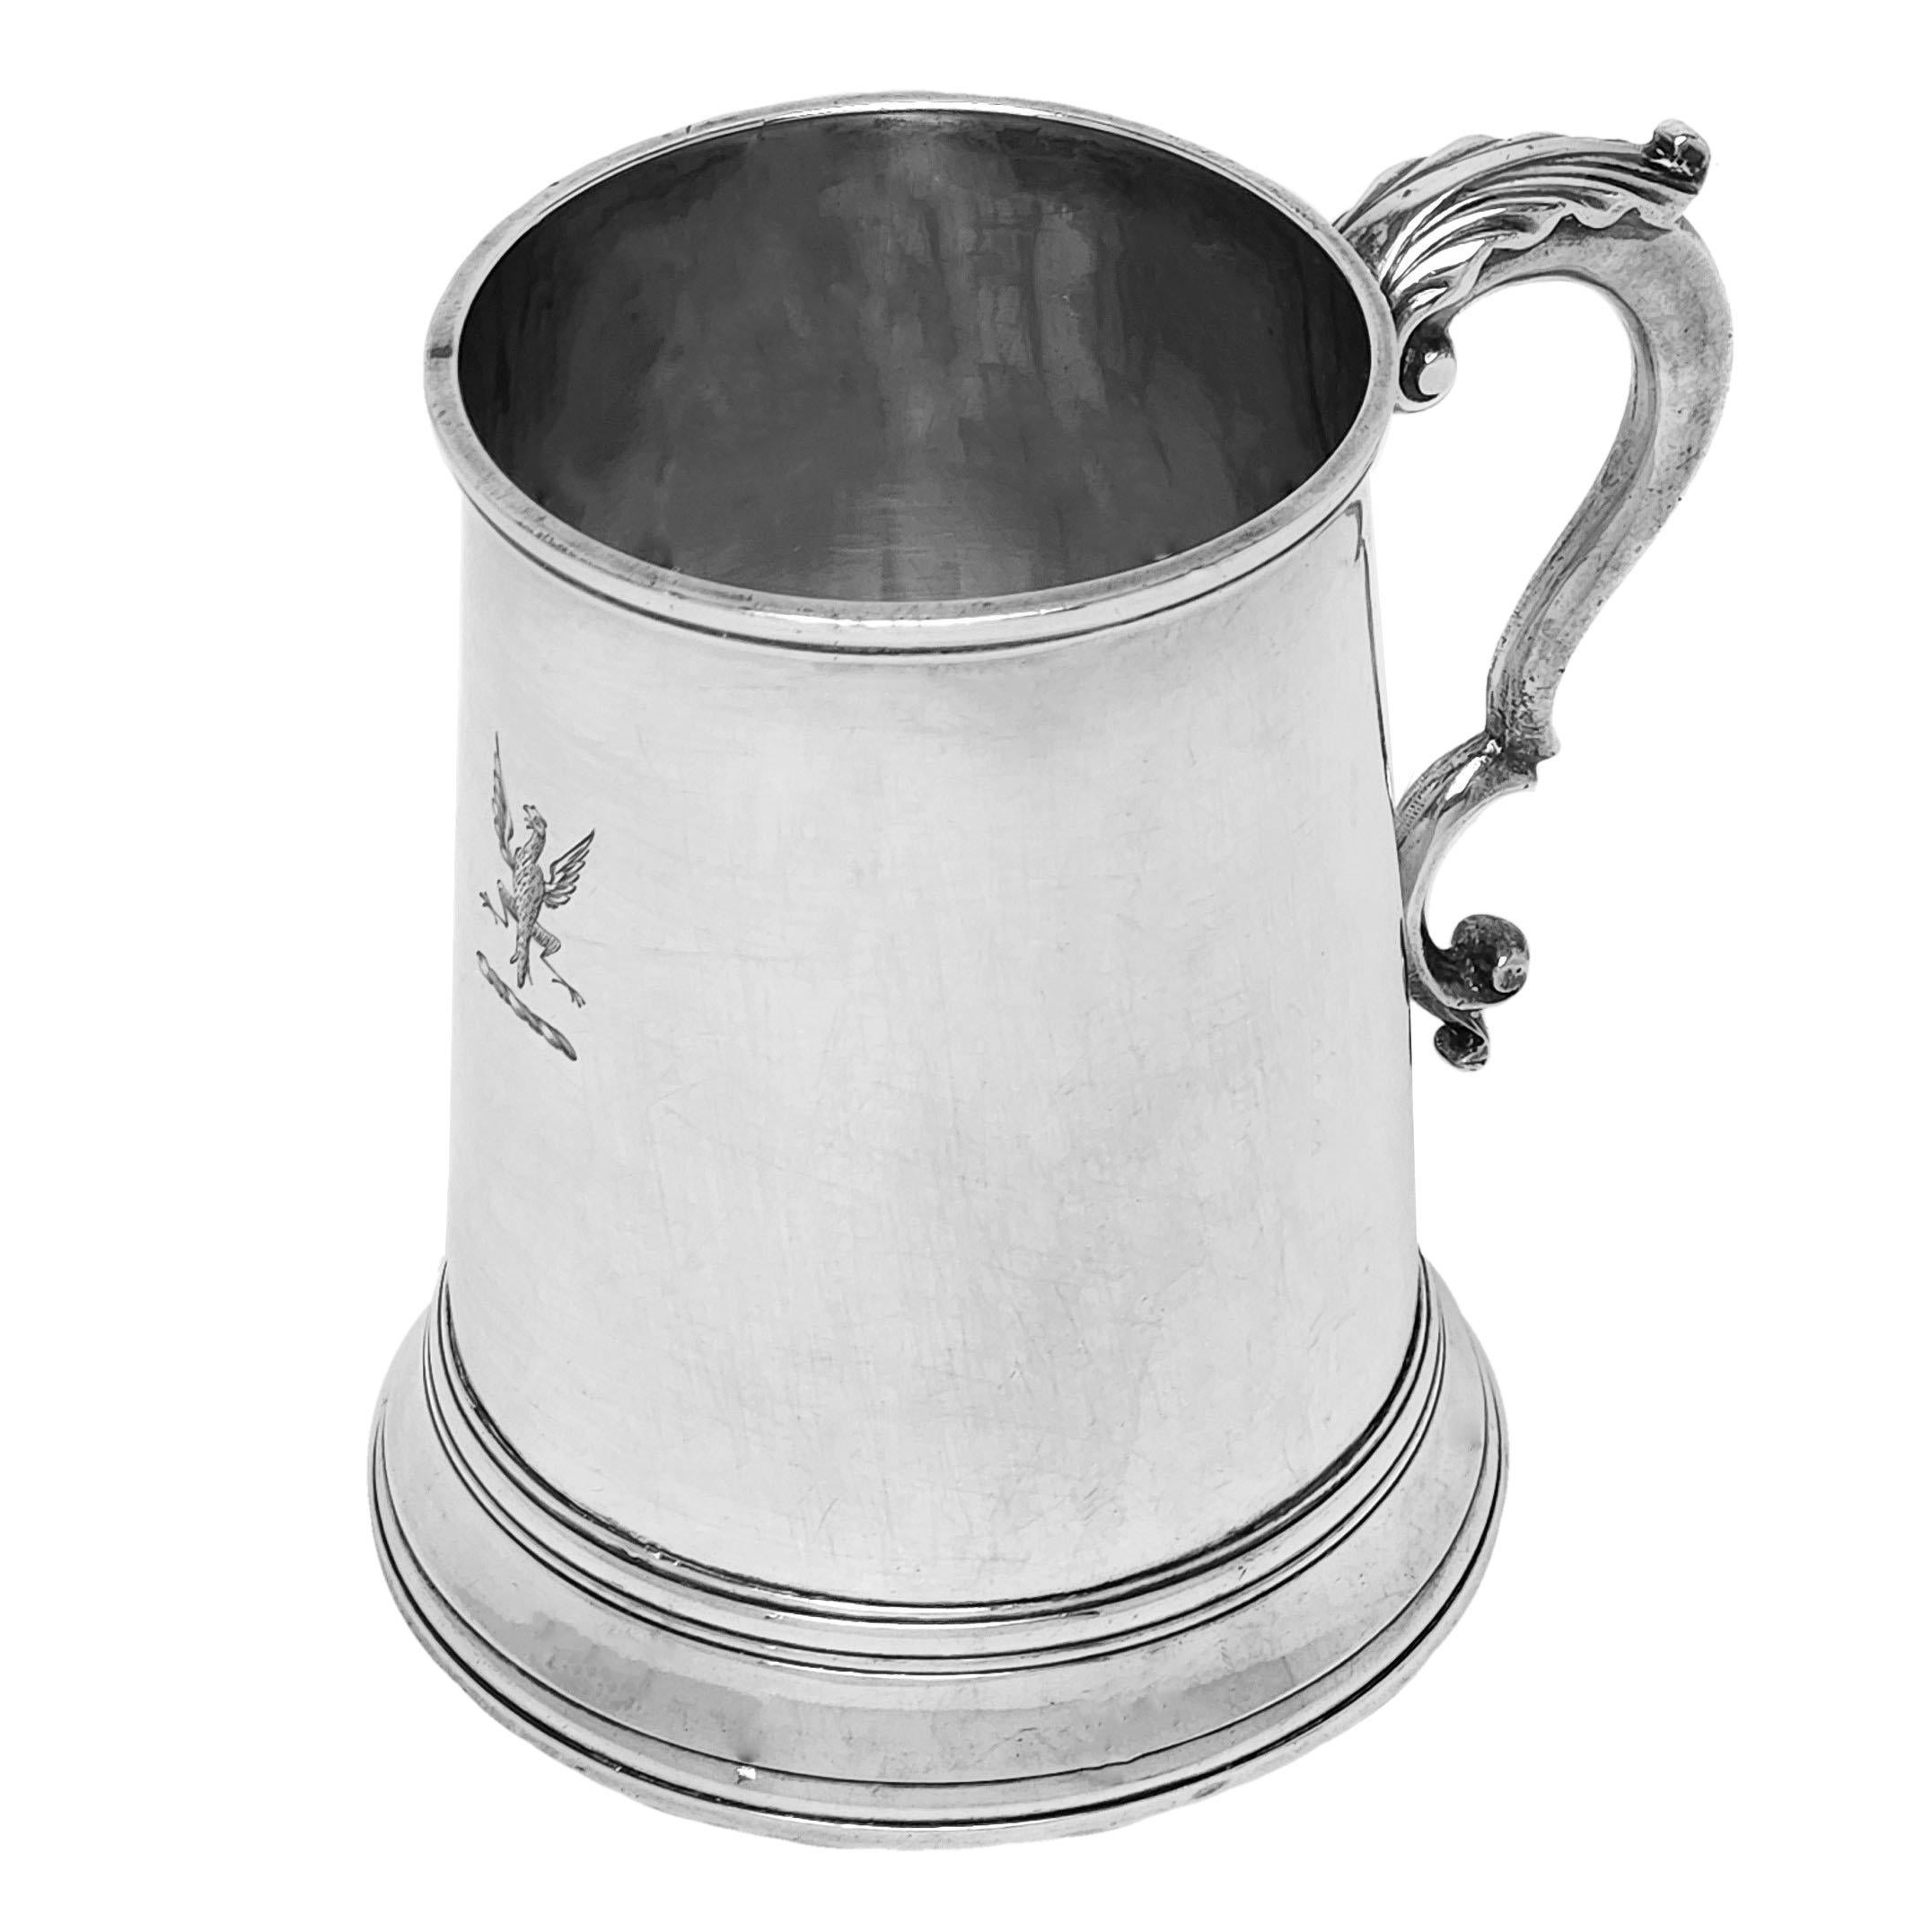 A classic Antique George III Sterling Silver Half Pint Mug with a traditional tapered cylindrical form. The Mug has a spread foot and a acanthus leaf topped scroll handle. There isa small crest engraved opposite the handle.

Of a suitable size as a